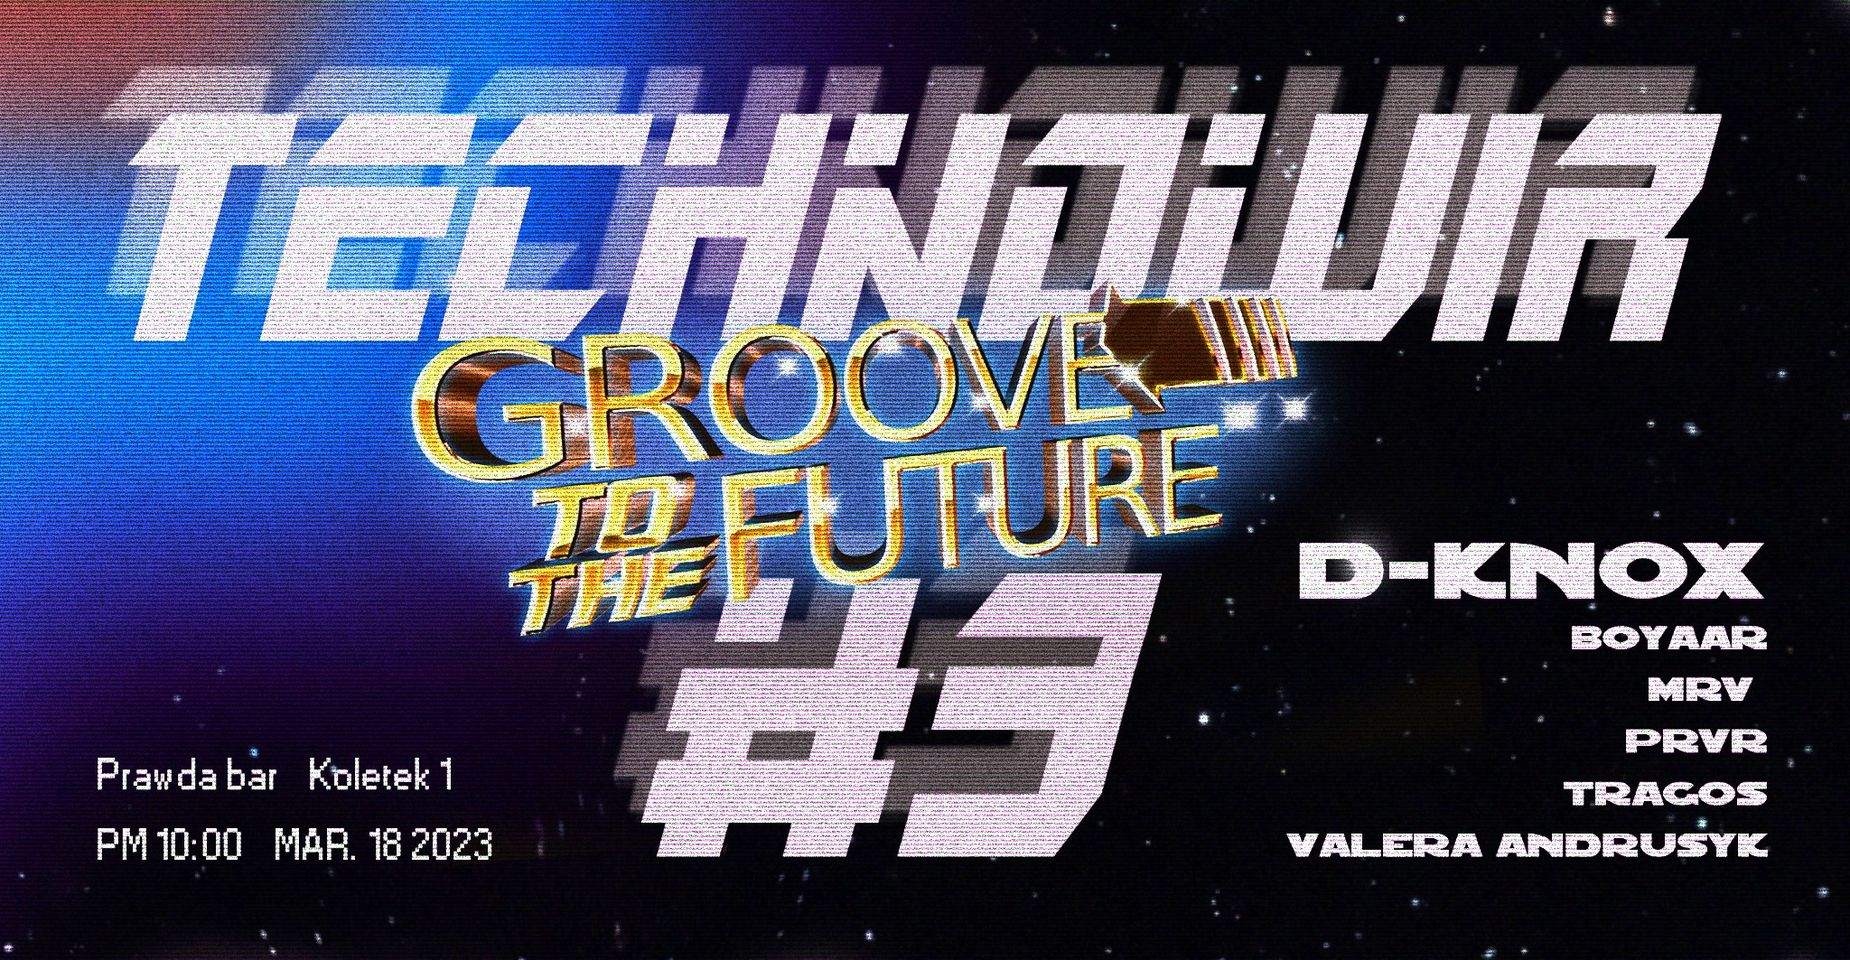 Techno WIR #3 / Groove to the future // D-knox - Página frontal